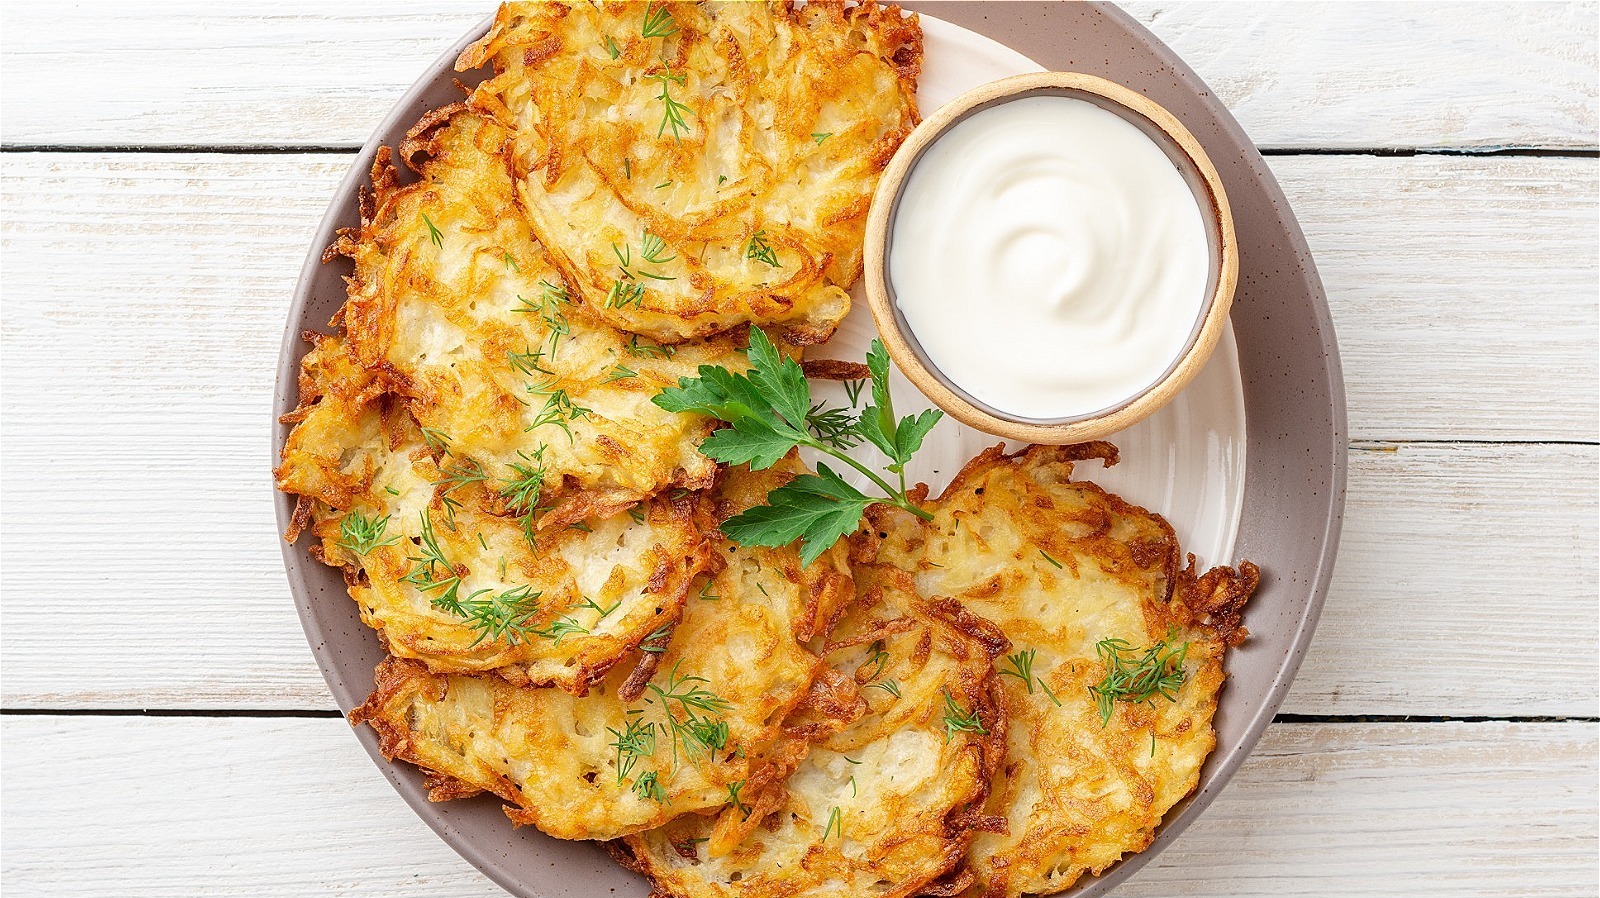 https://www.mashed.com/img/gallery/kugel-and-latkes-are-more-similar-than-you-might-think/l-intro-1637698487.jpg